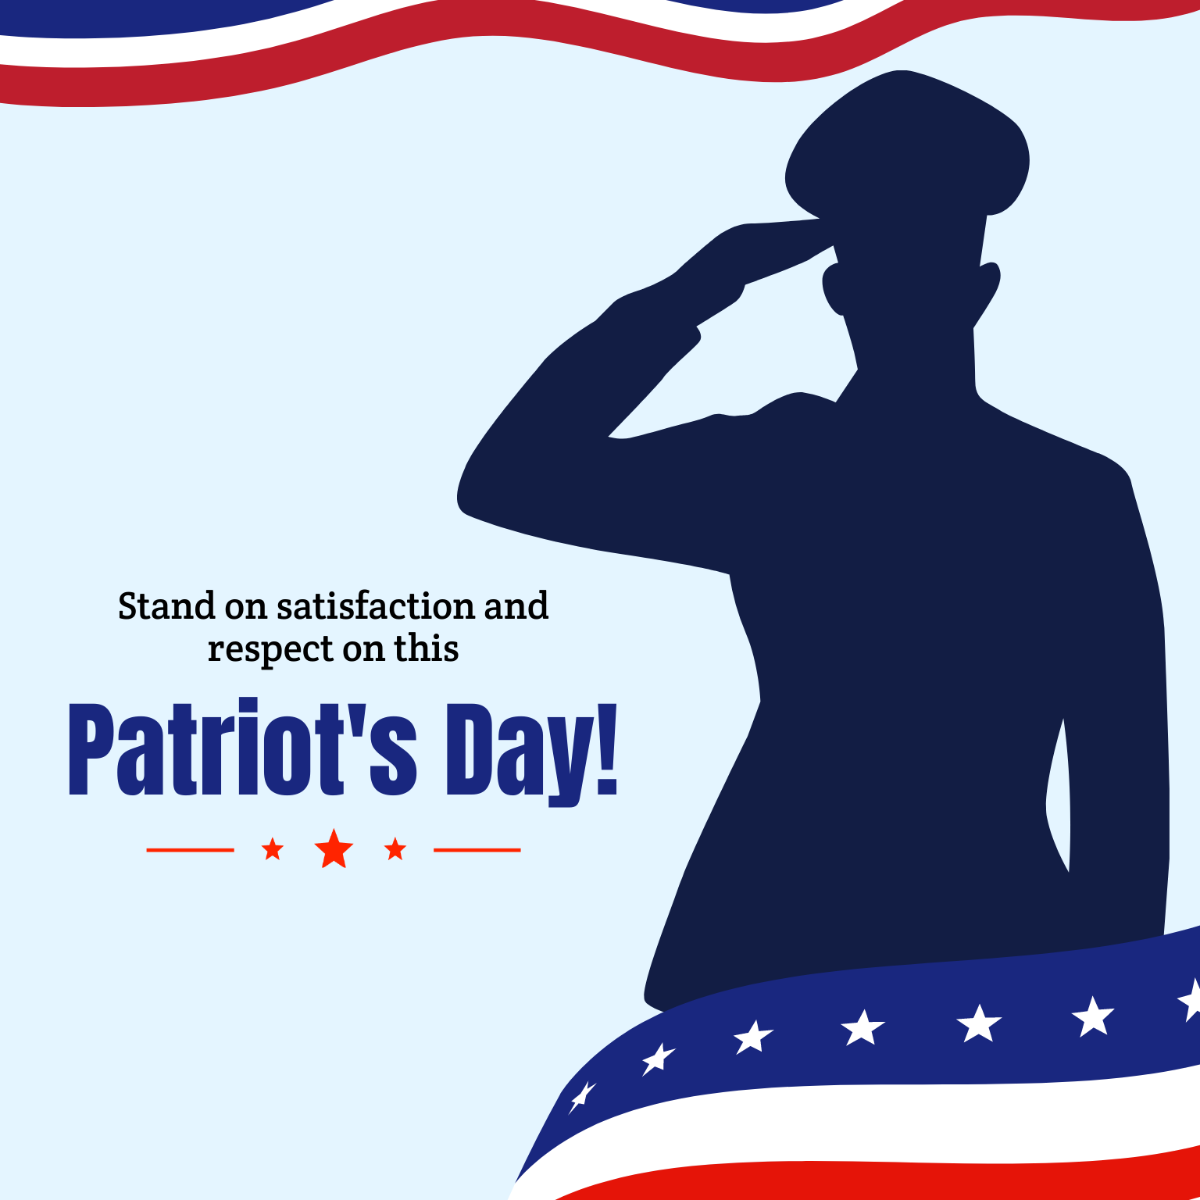 Patriots' Day Greeting Card Vector Template